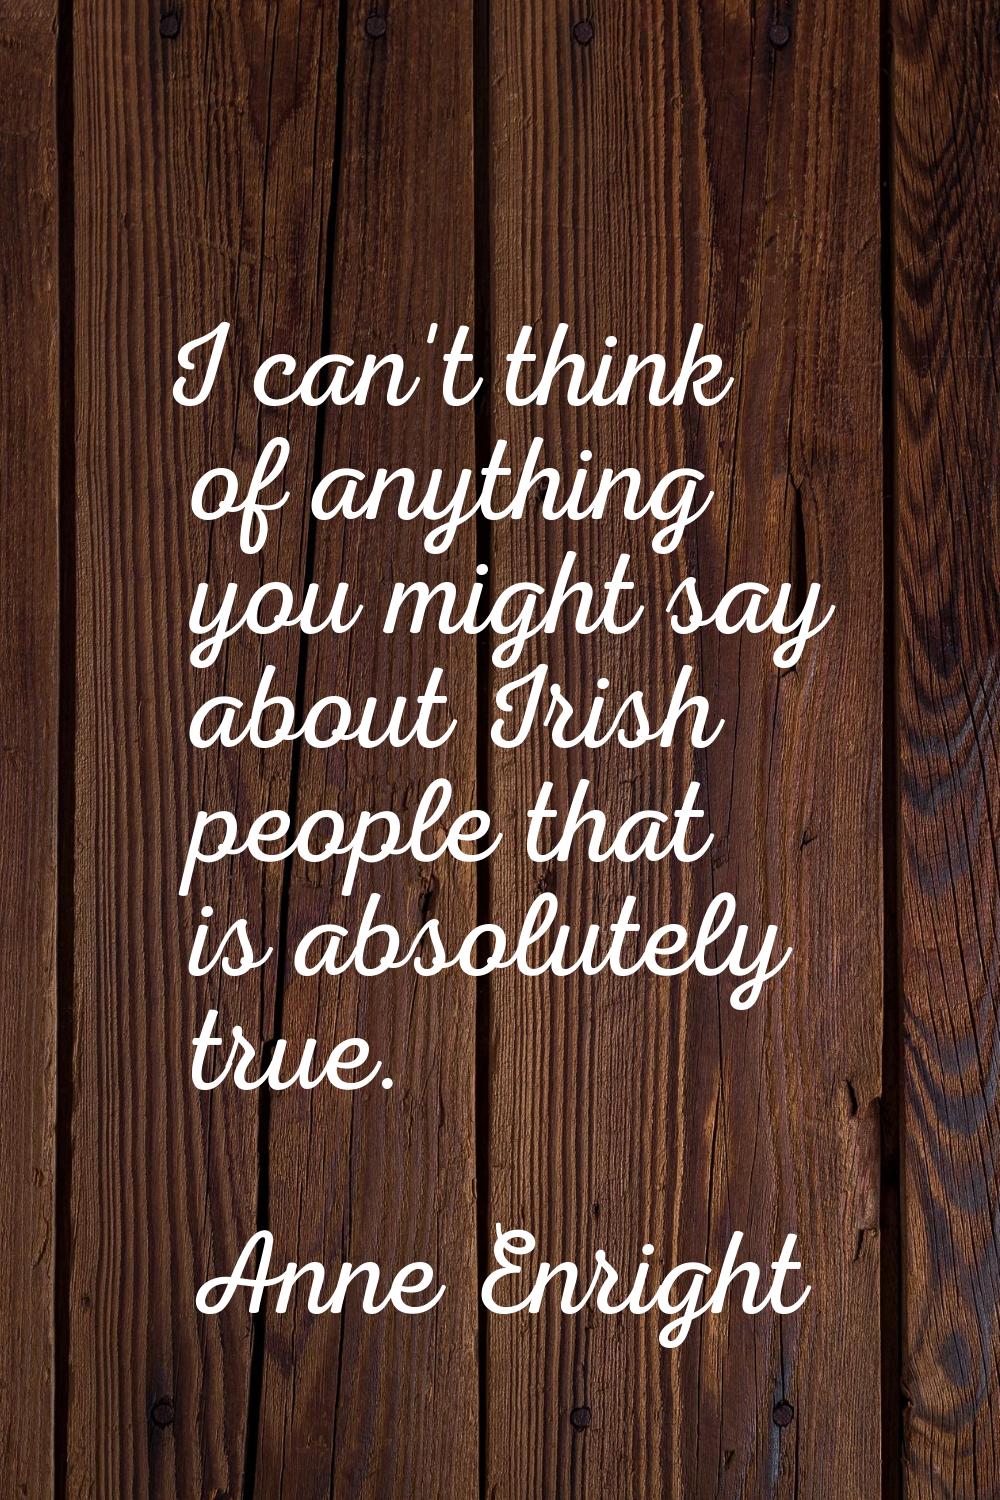 I can't think of anything you might say about Irish people that is absolutely true.